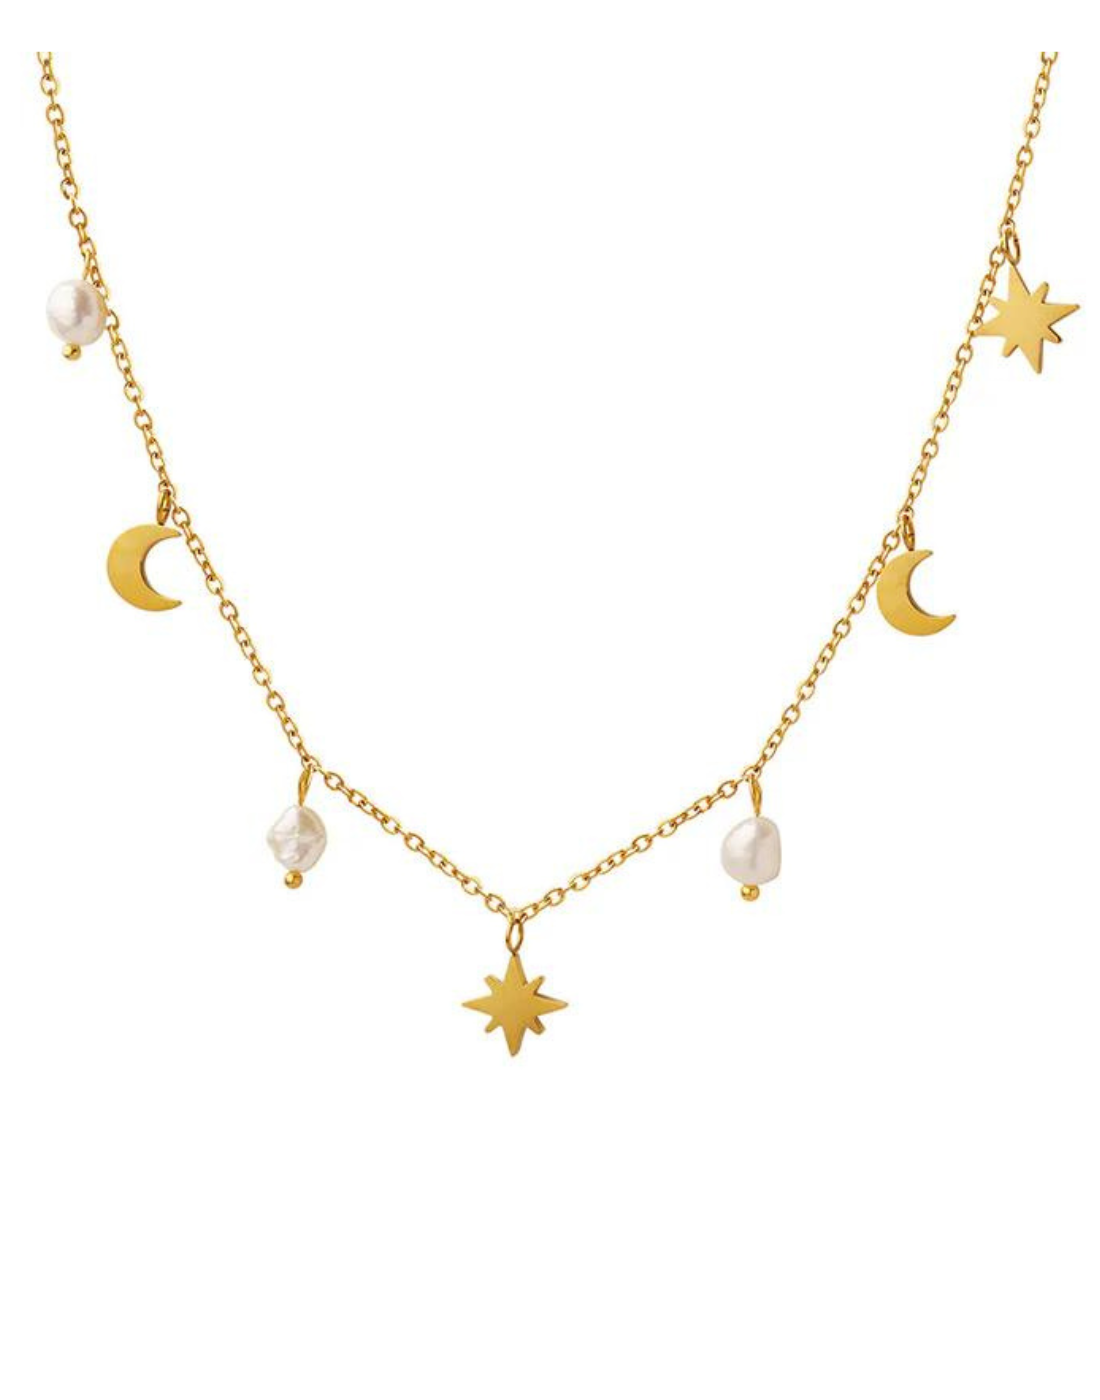 North Star Moon Pearl Necklace With Charms - Choker